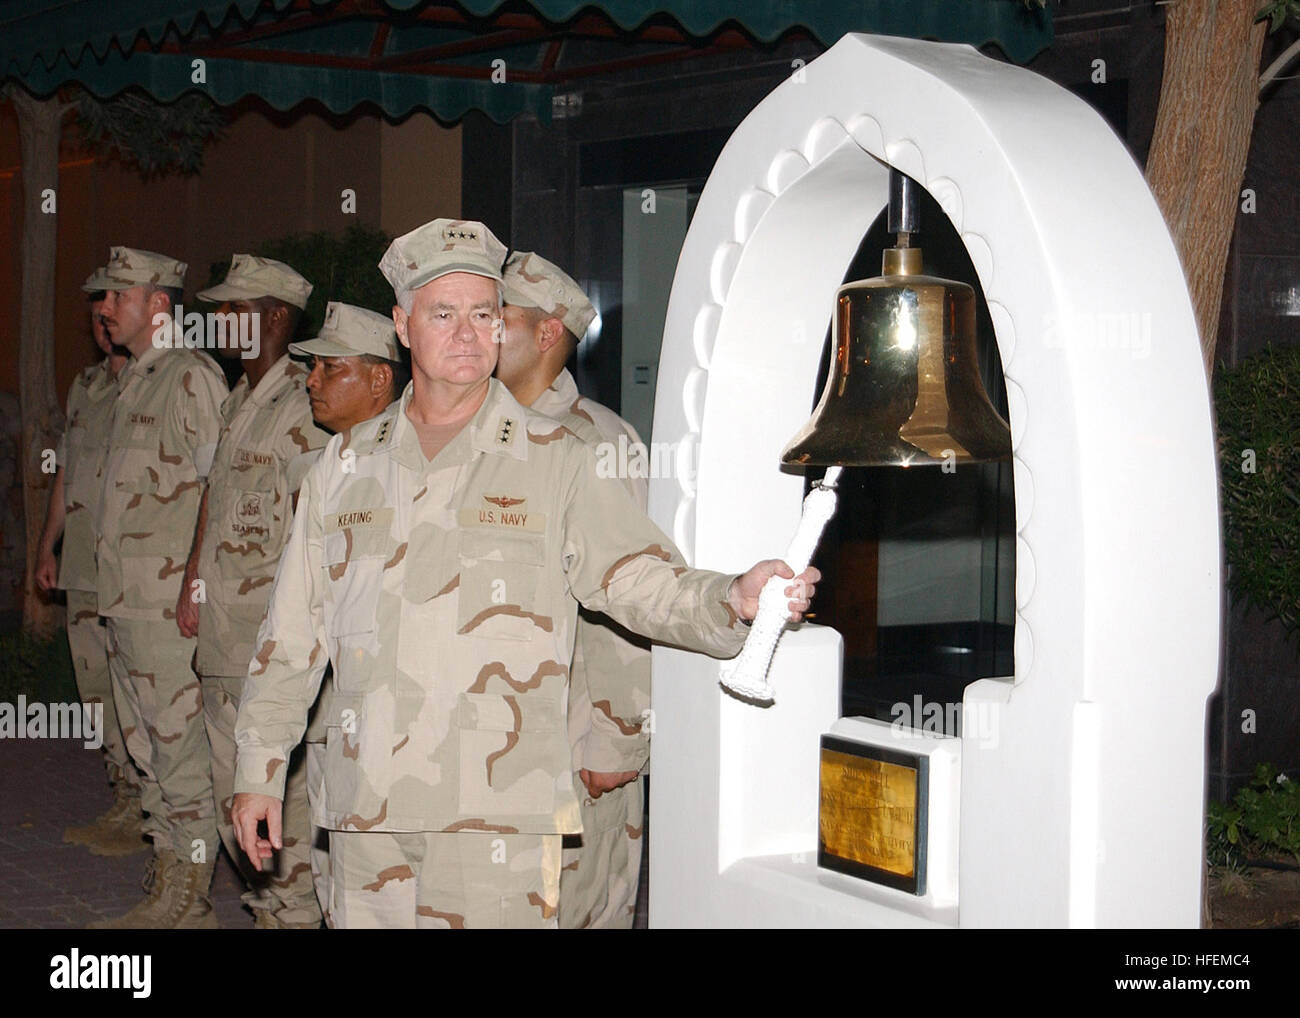 030704-N-7573H-001  Manamha, Bahrain (Jul. 4, 2003) -- Vice Adm. Timothy J. Keating, Commander U.S. Naval Forces Central Command/Commander U.S. 5th Fleet, rings the base ship's bell as part of a July 4th ceremony at Naval Support Activity Bahrain. The ceremony commemorating Independence Day featured the ringing of thirteen bells aboard U.S. military installations throughout the world simultaneously at 2 p.m. EST.  U.S. Navy photo by Photographer's Mate 1st Class Ernest Hunt.  (RELEASED) US Navy 030704-N-7573H-001 Vice Adm. Timothy J. Keating, Commander U.S. Naval Forces Central Command-Command Stock Photo